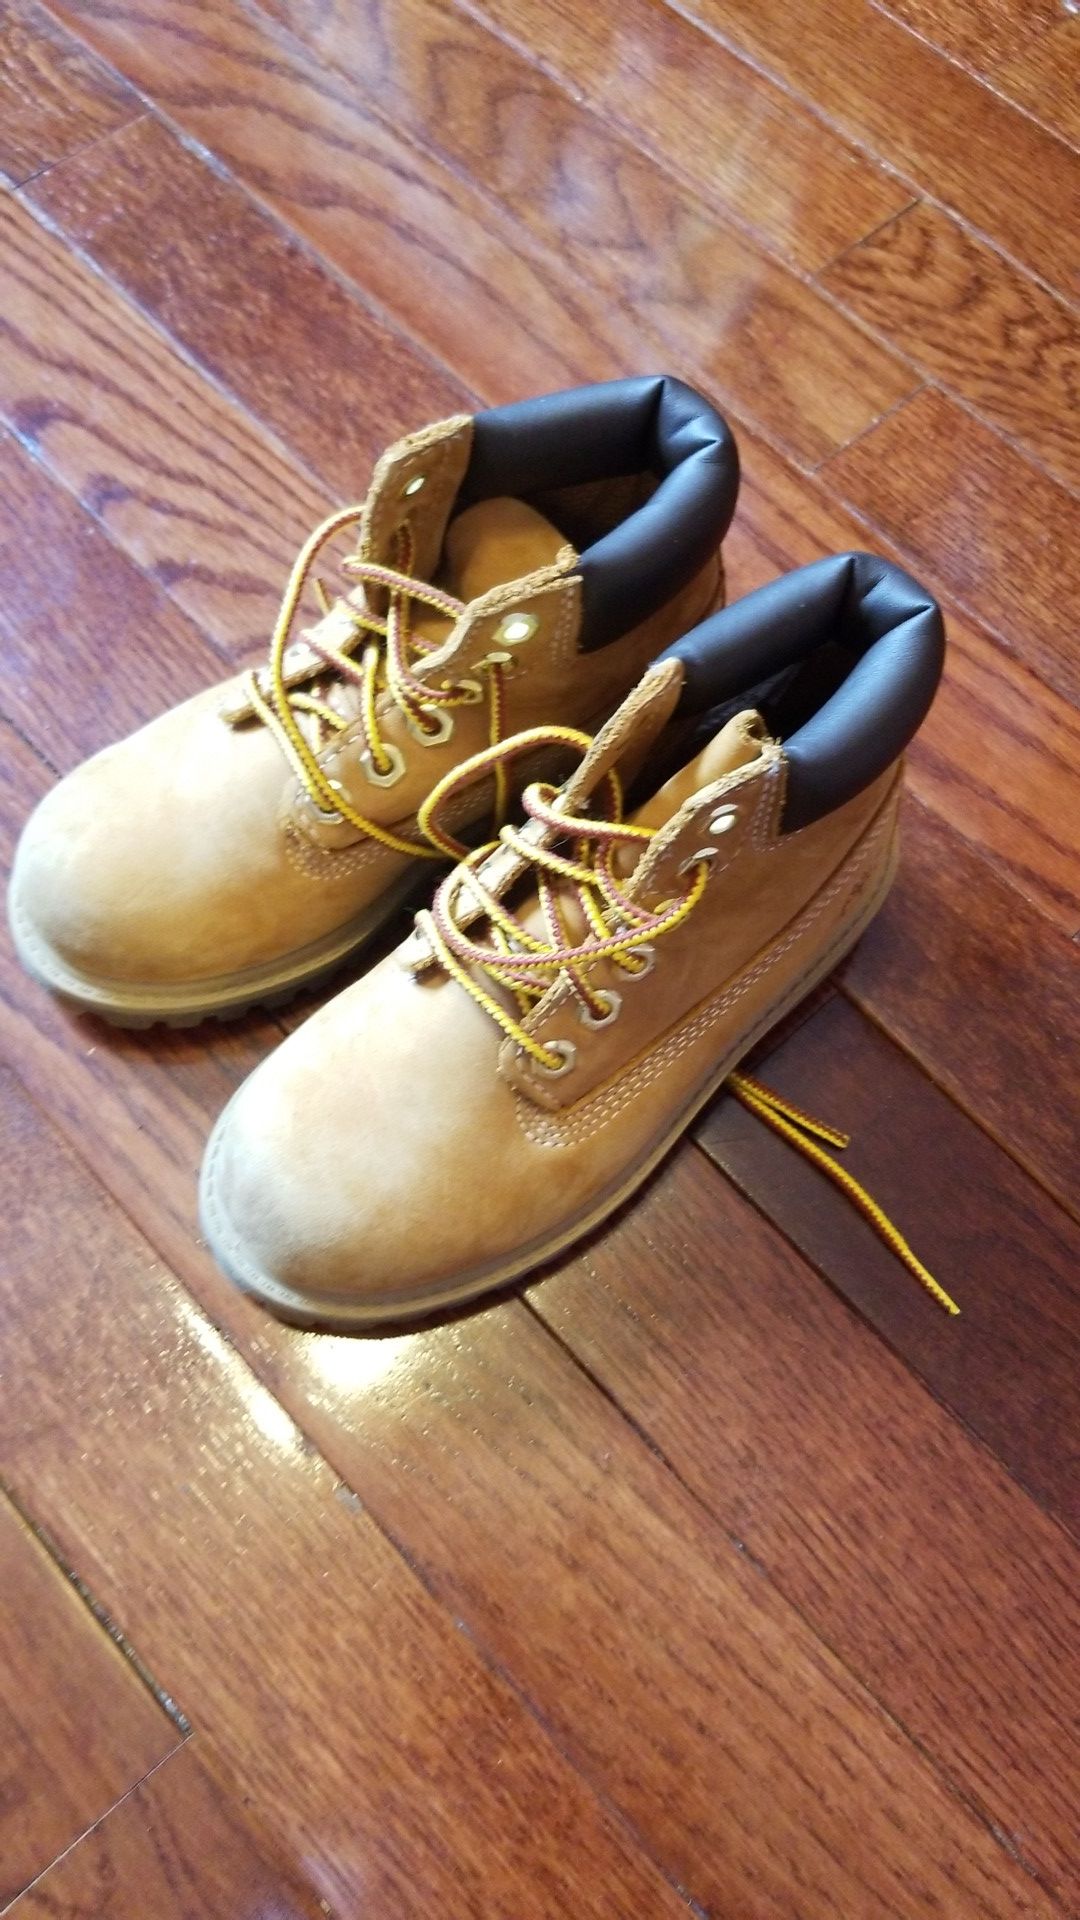 Timberland Toddler Boy Boots - Size 10